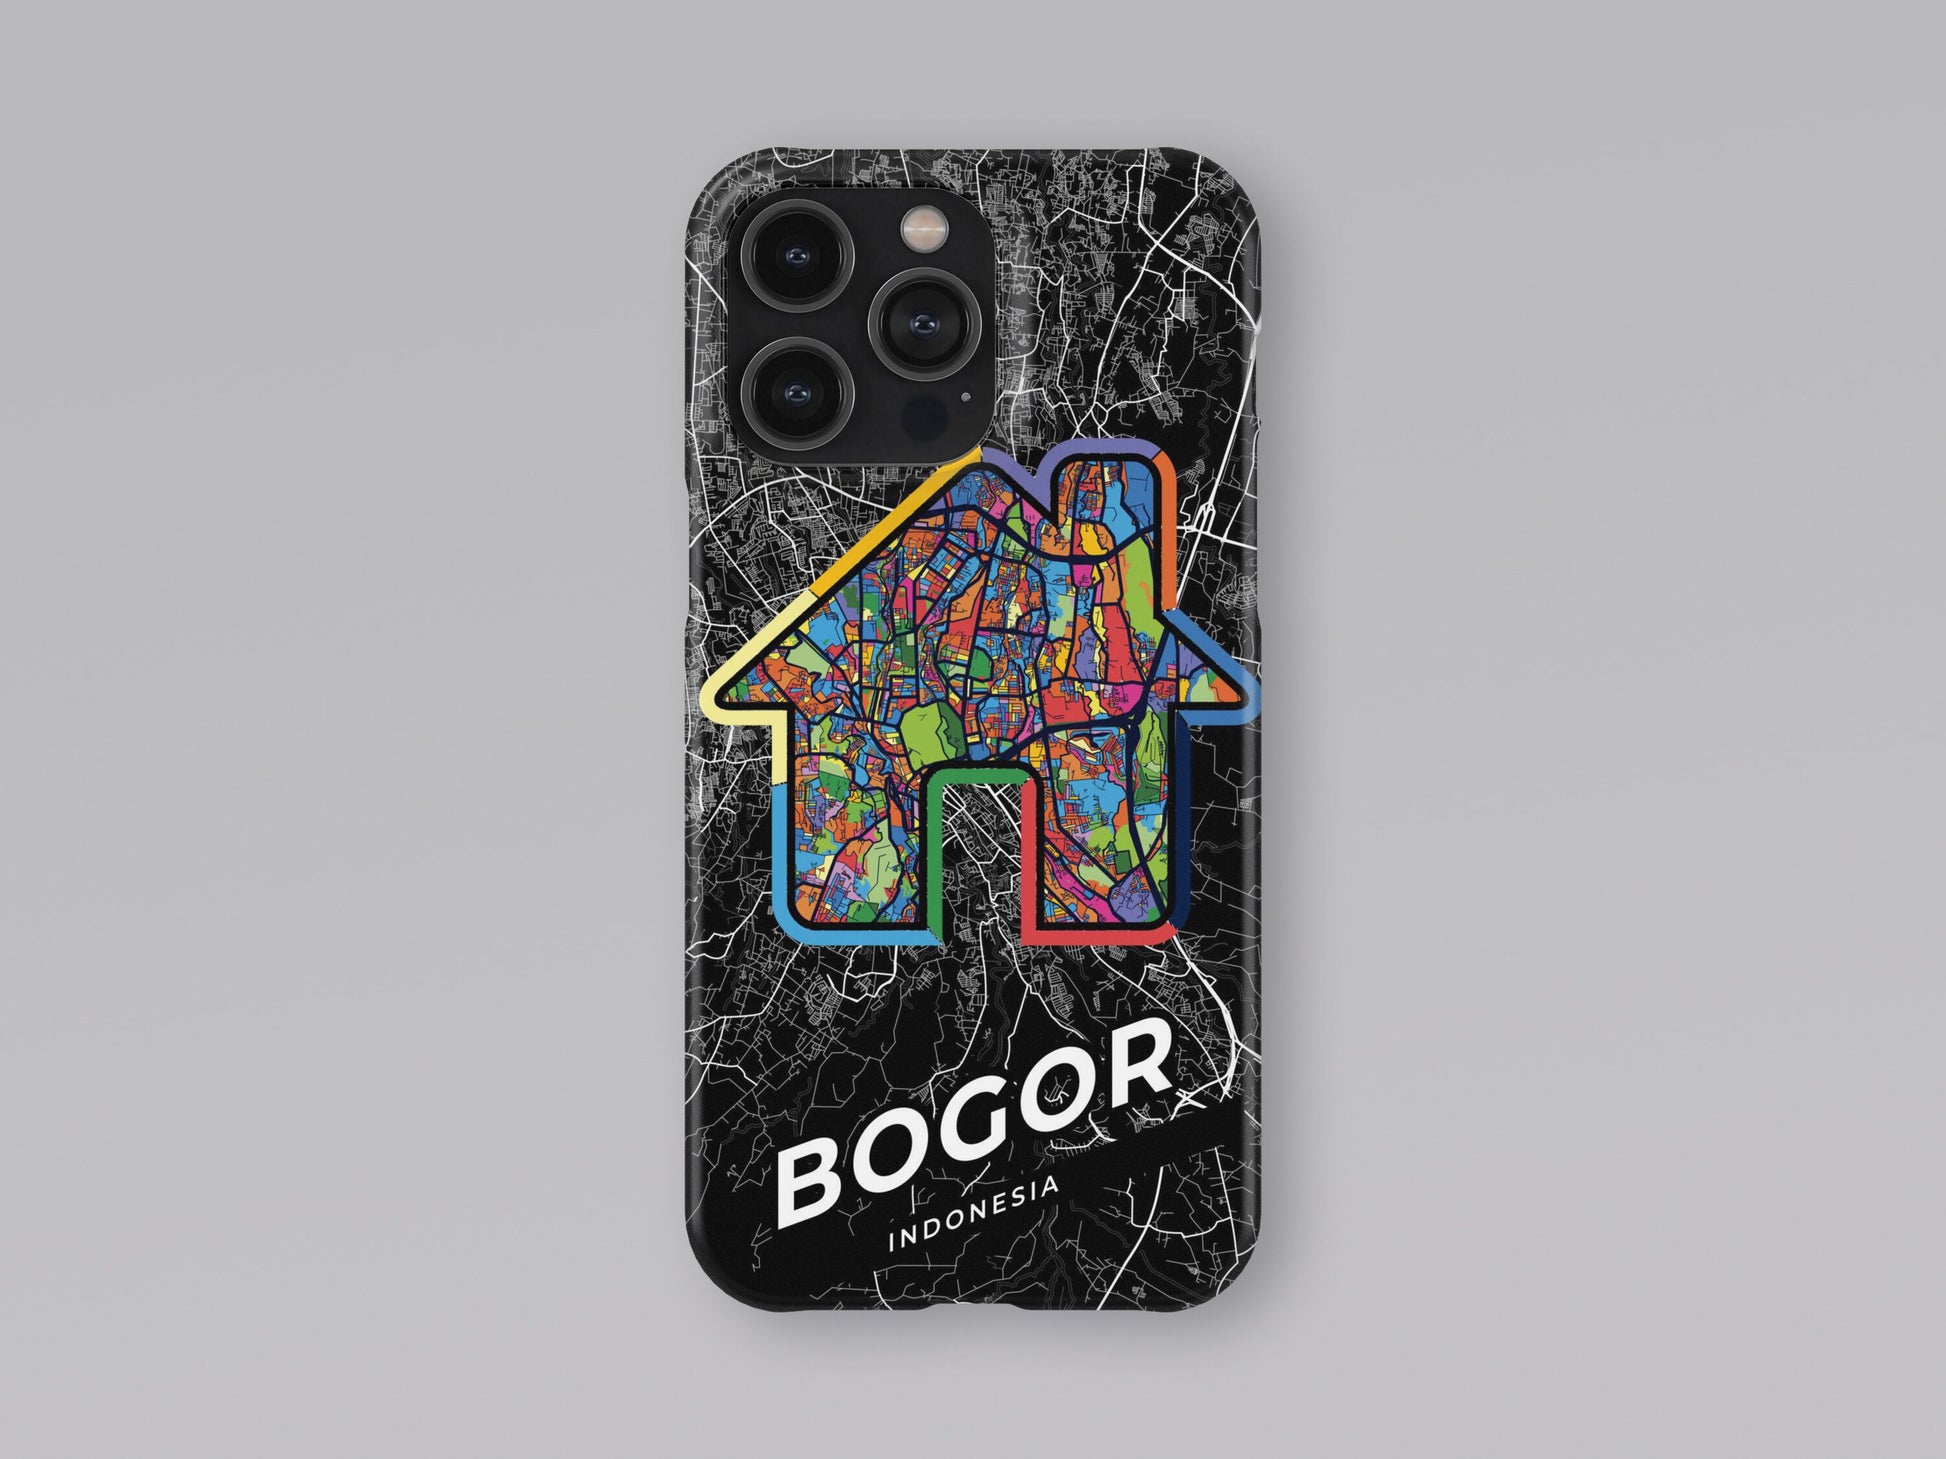 Bogor Indonesia slim phone case with colorful icon. Birthday, wedding or housewarming gift. Couple match cases. 3